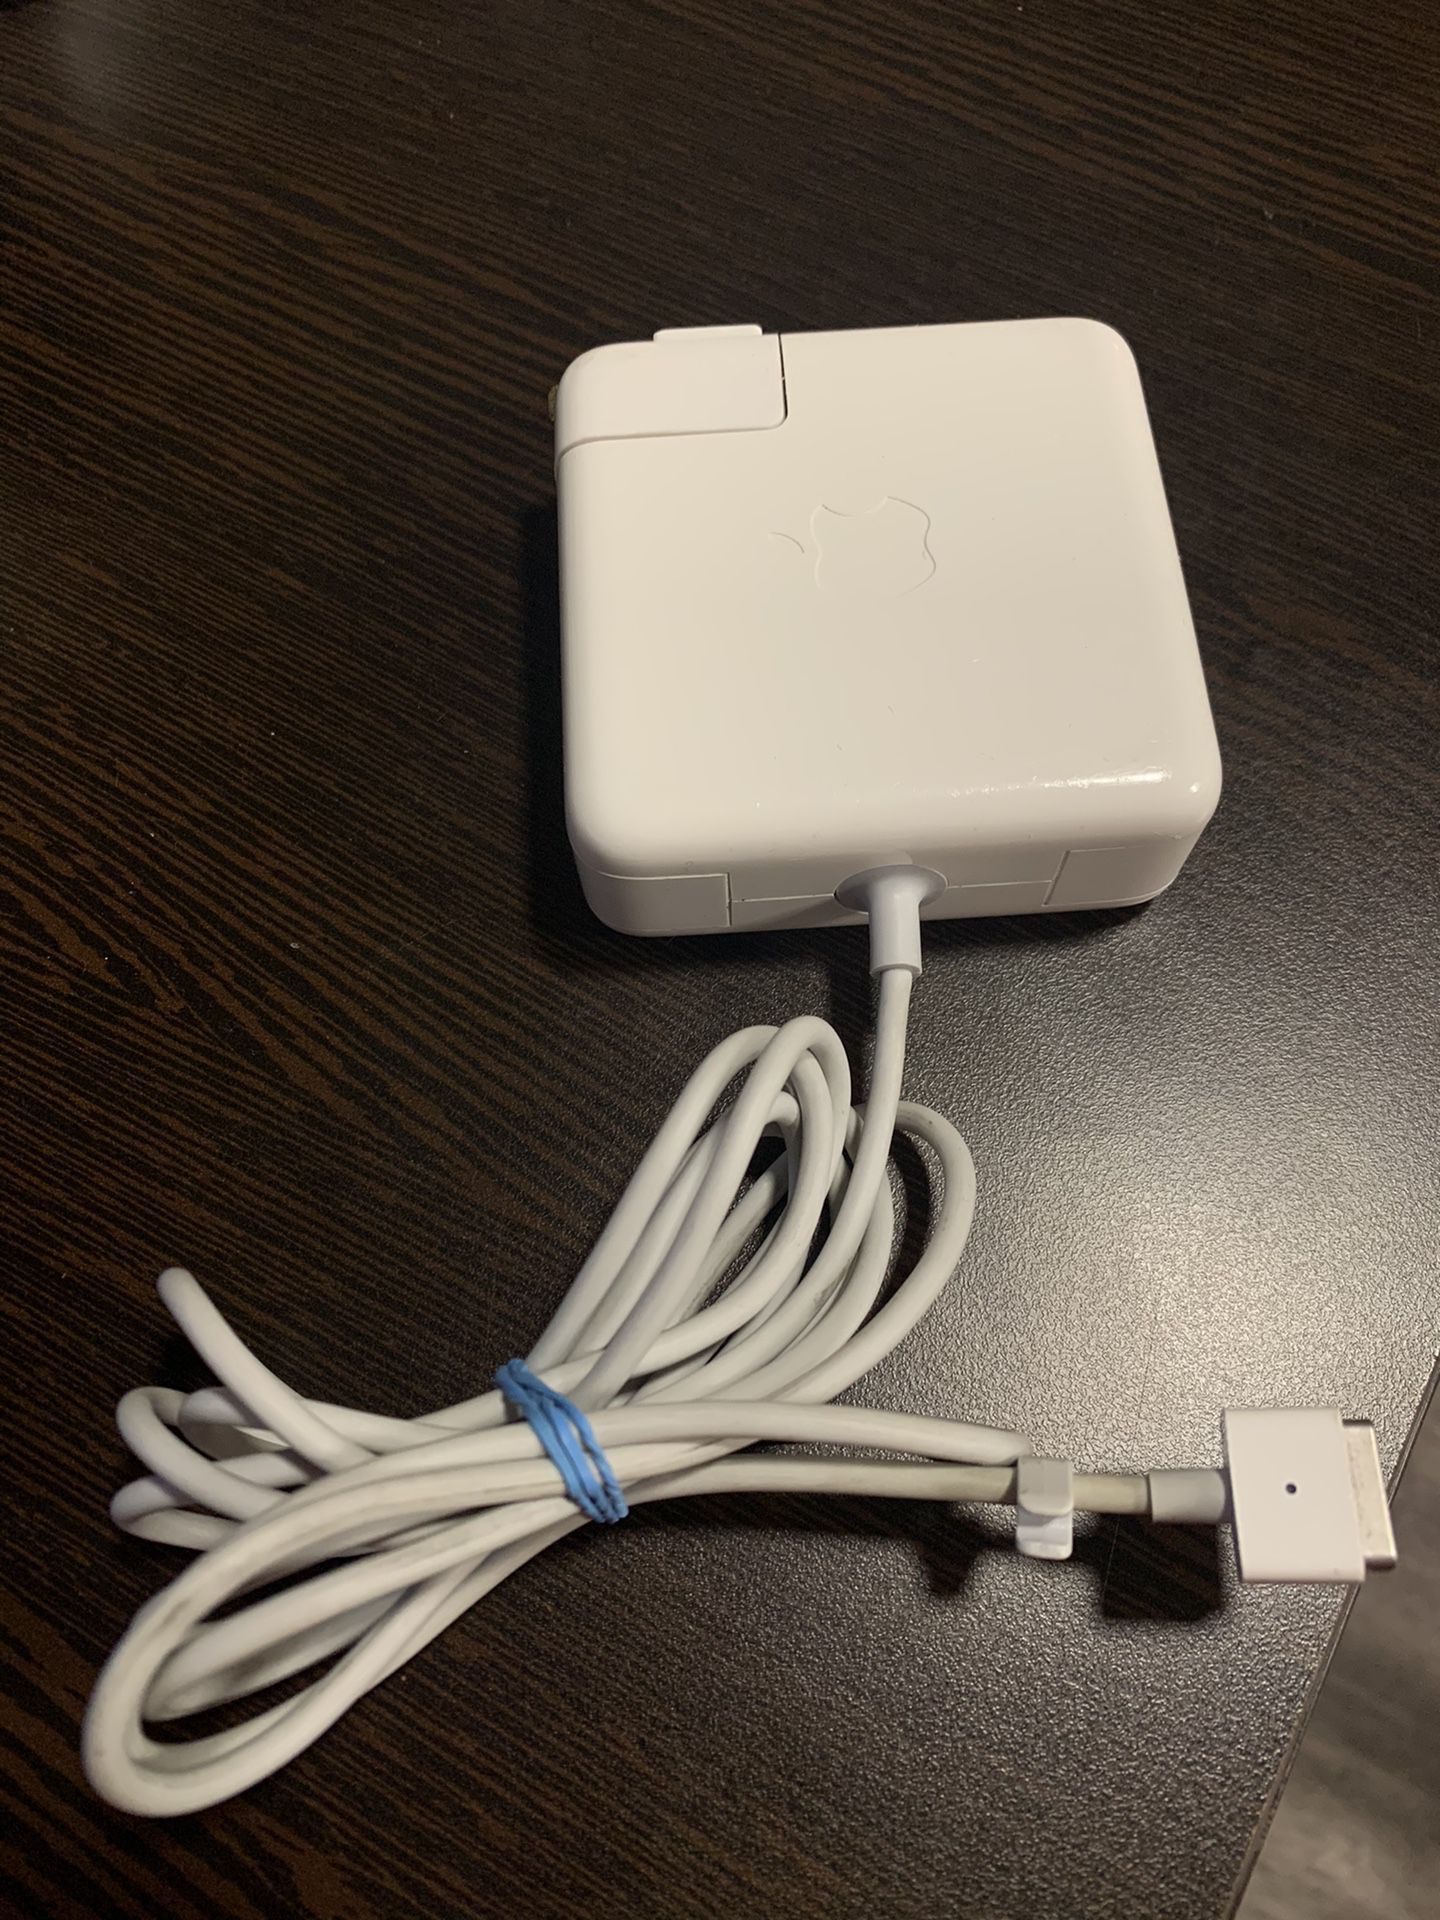 Apple Macbook Air/Pro Charger